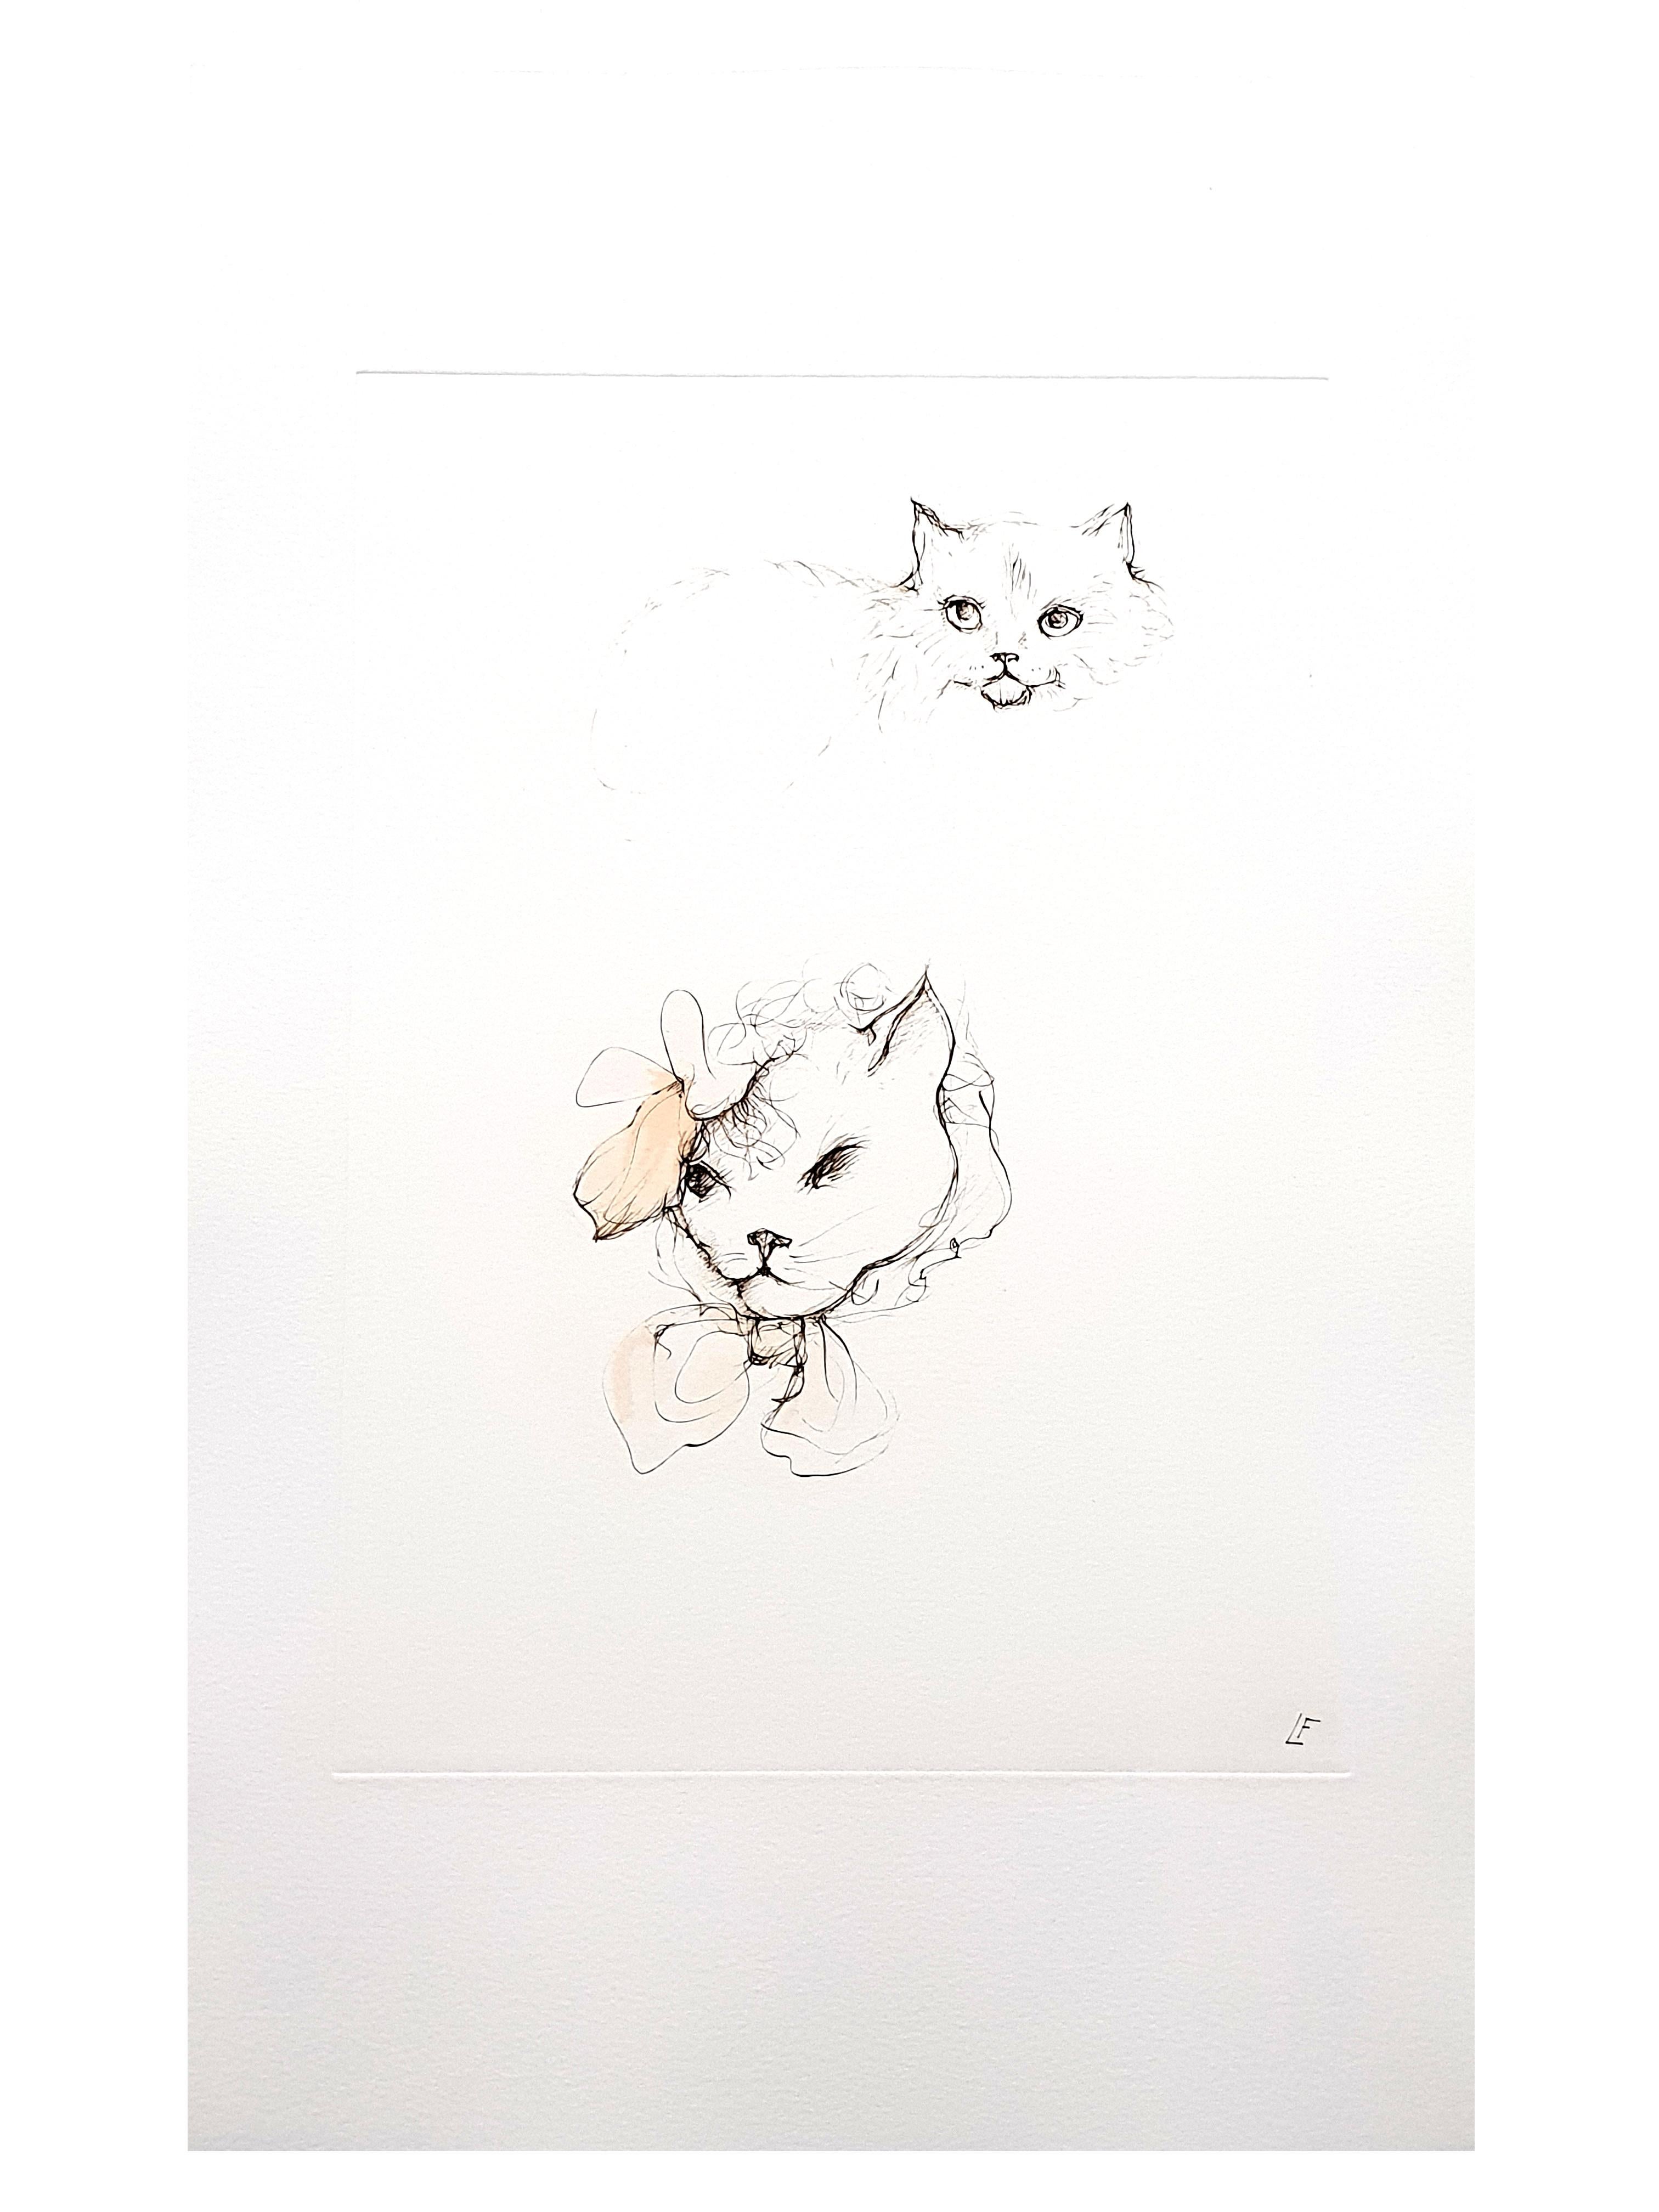 Leonor Fini - Cats - Original Engraving
Mme.Helvetius' Cats
Original etching created in 1985, Printed Signature (LF).
Conditions: excellent
Edition: 100 
Support: Arches paper.
Dimensions: Paper dimensions: 44 x 28 cm 
Editions: Moret,